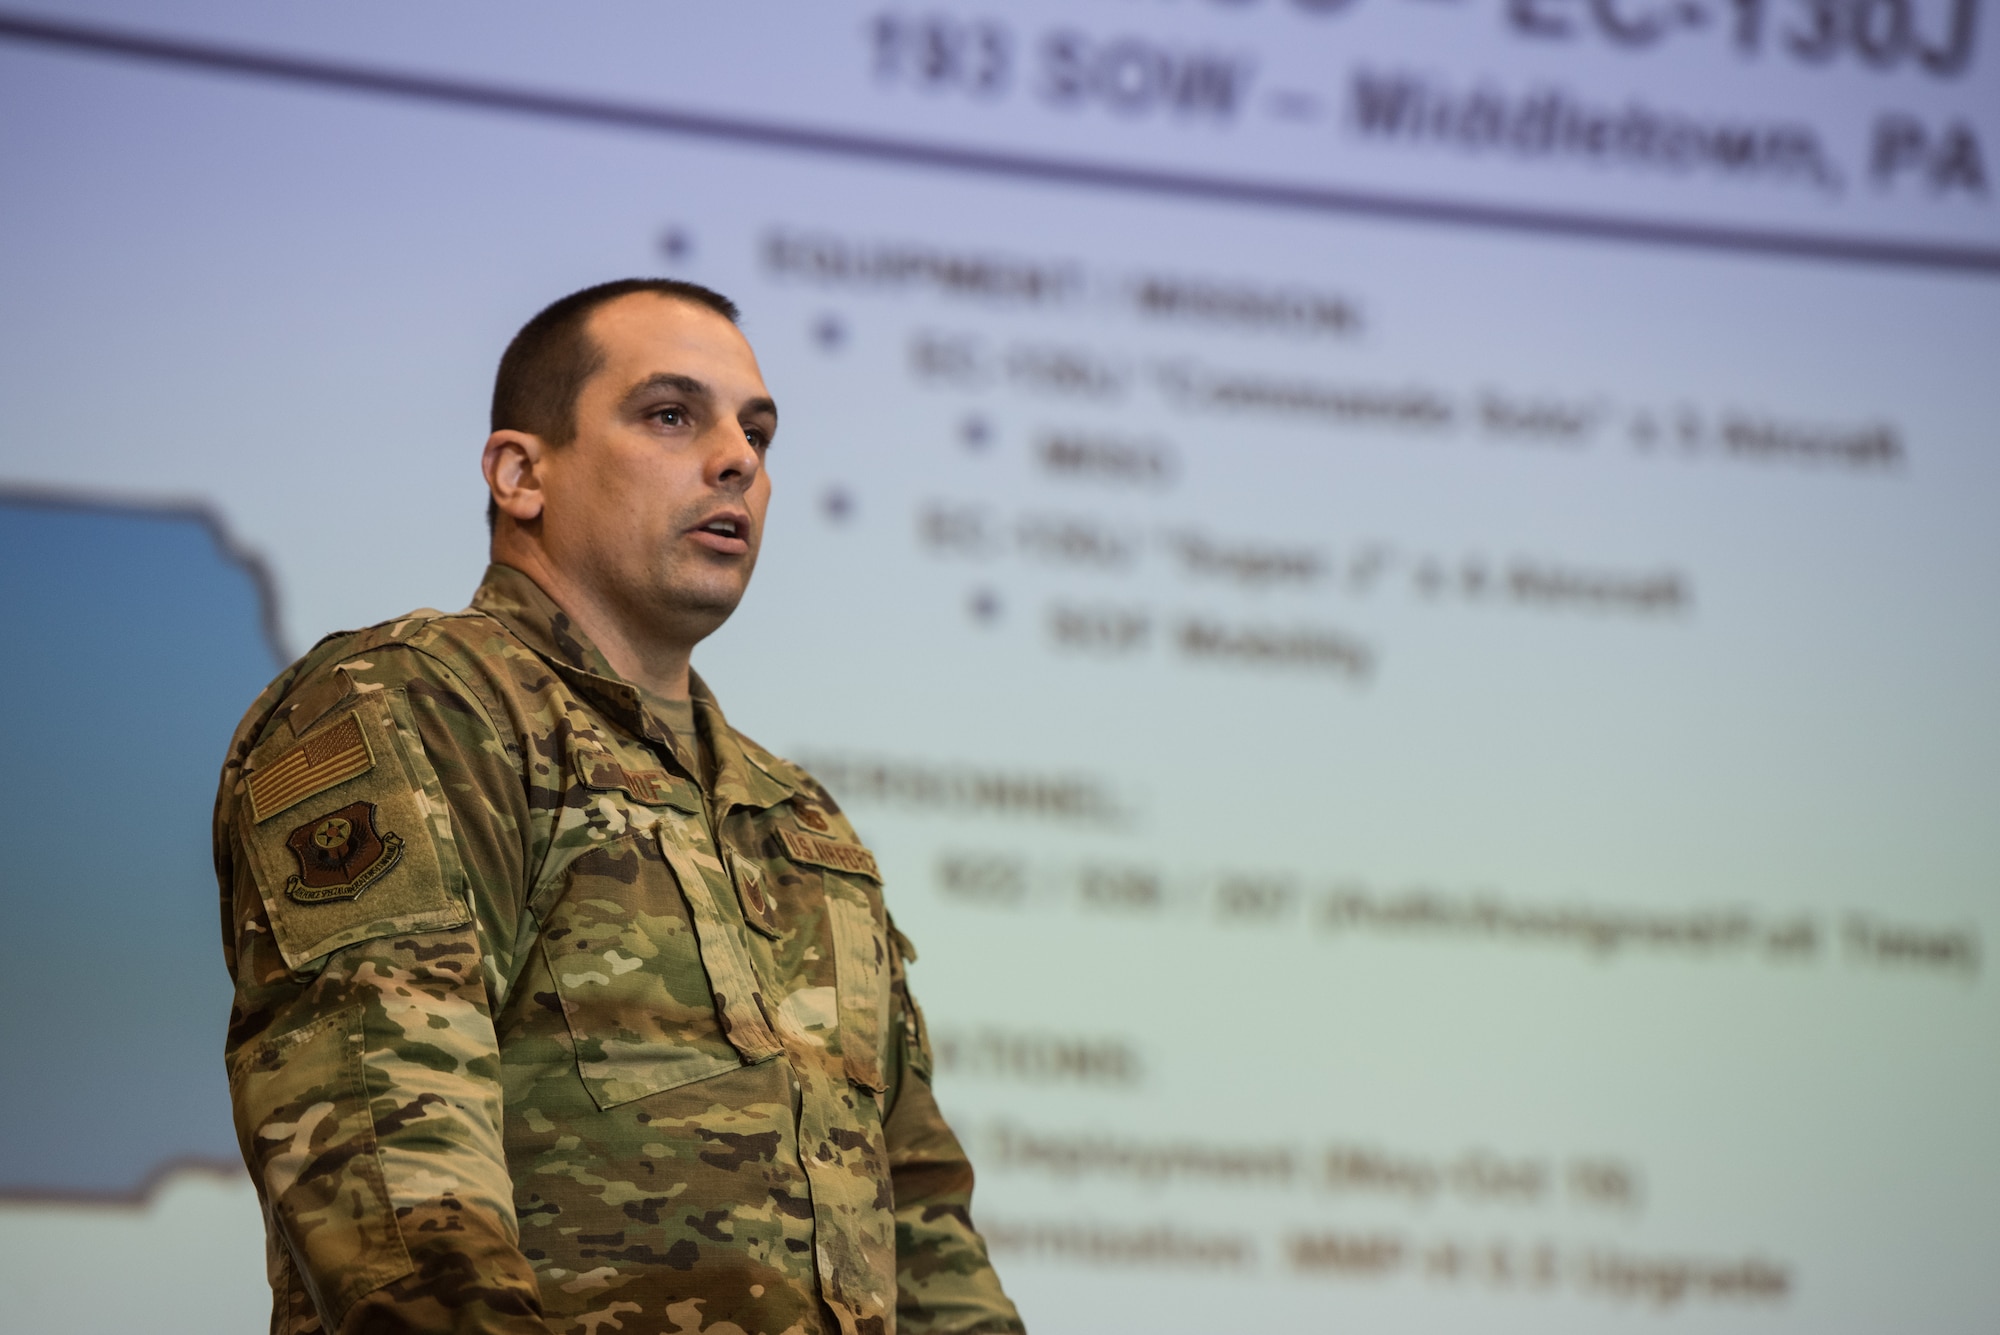 Tech. Sgt. Jody Roof briefs the 193rd SOW mission during a joint recruiting event, Feb. 27, 2019, in Hurlburt Field, Florida.